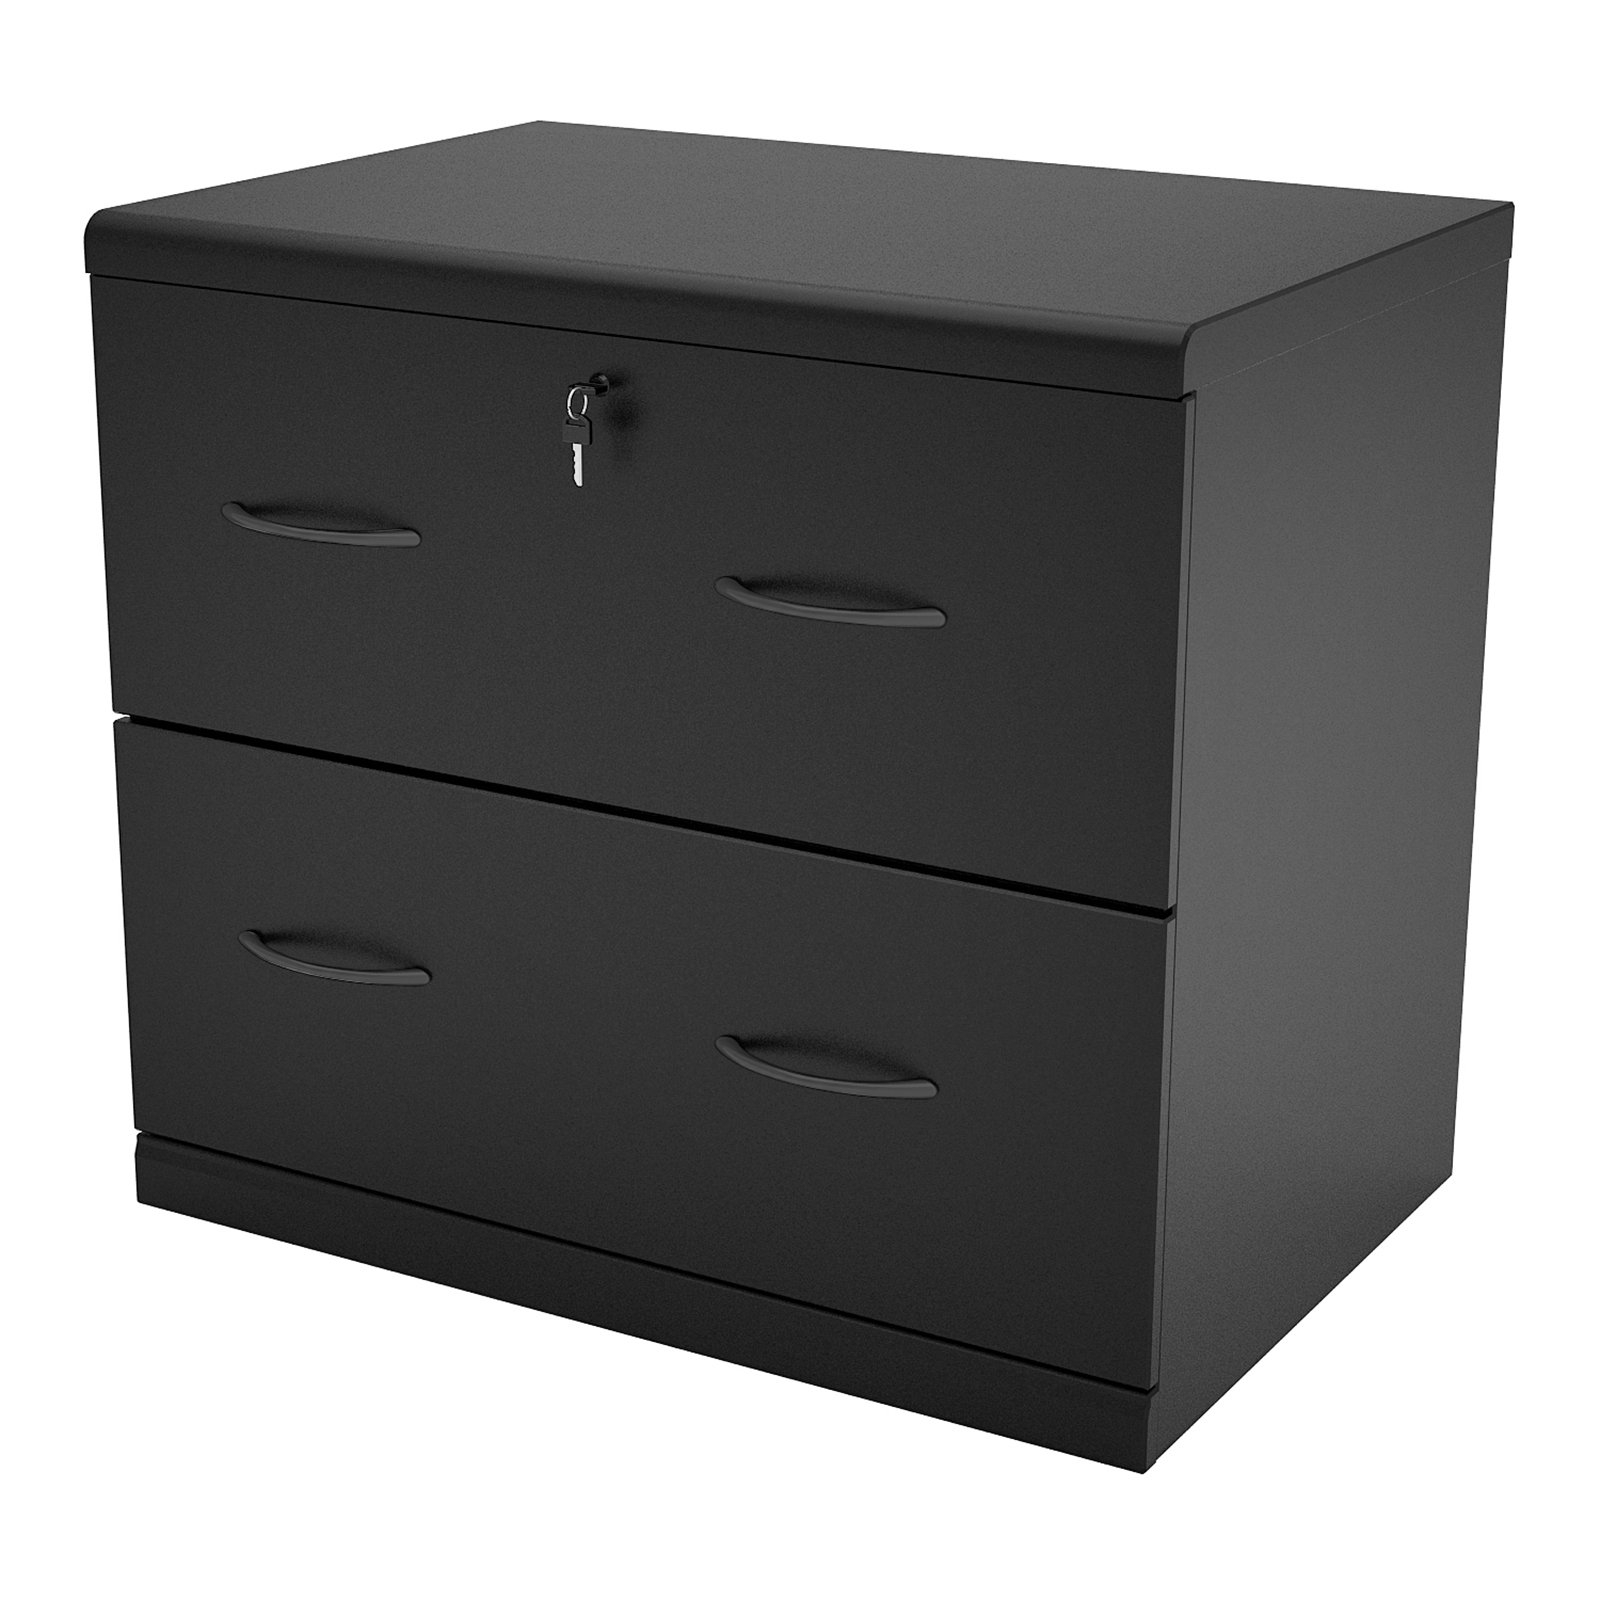 2 Drawer Lateral Wood Lockable Filing Cabinet Black Walmart throughout proportions 1600 X 1600